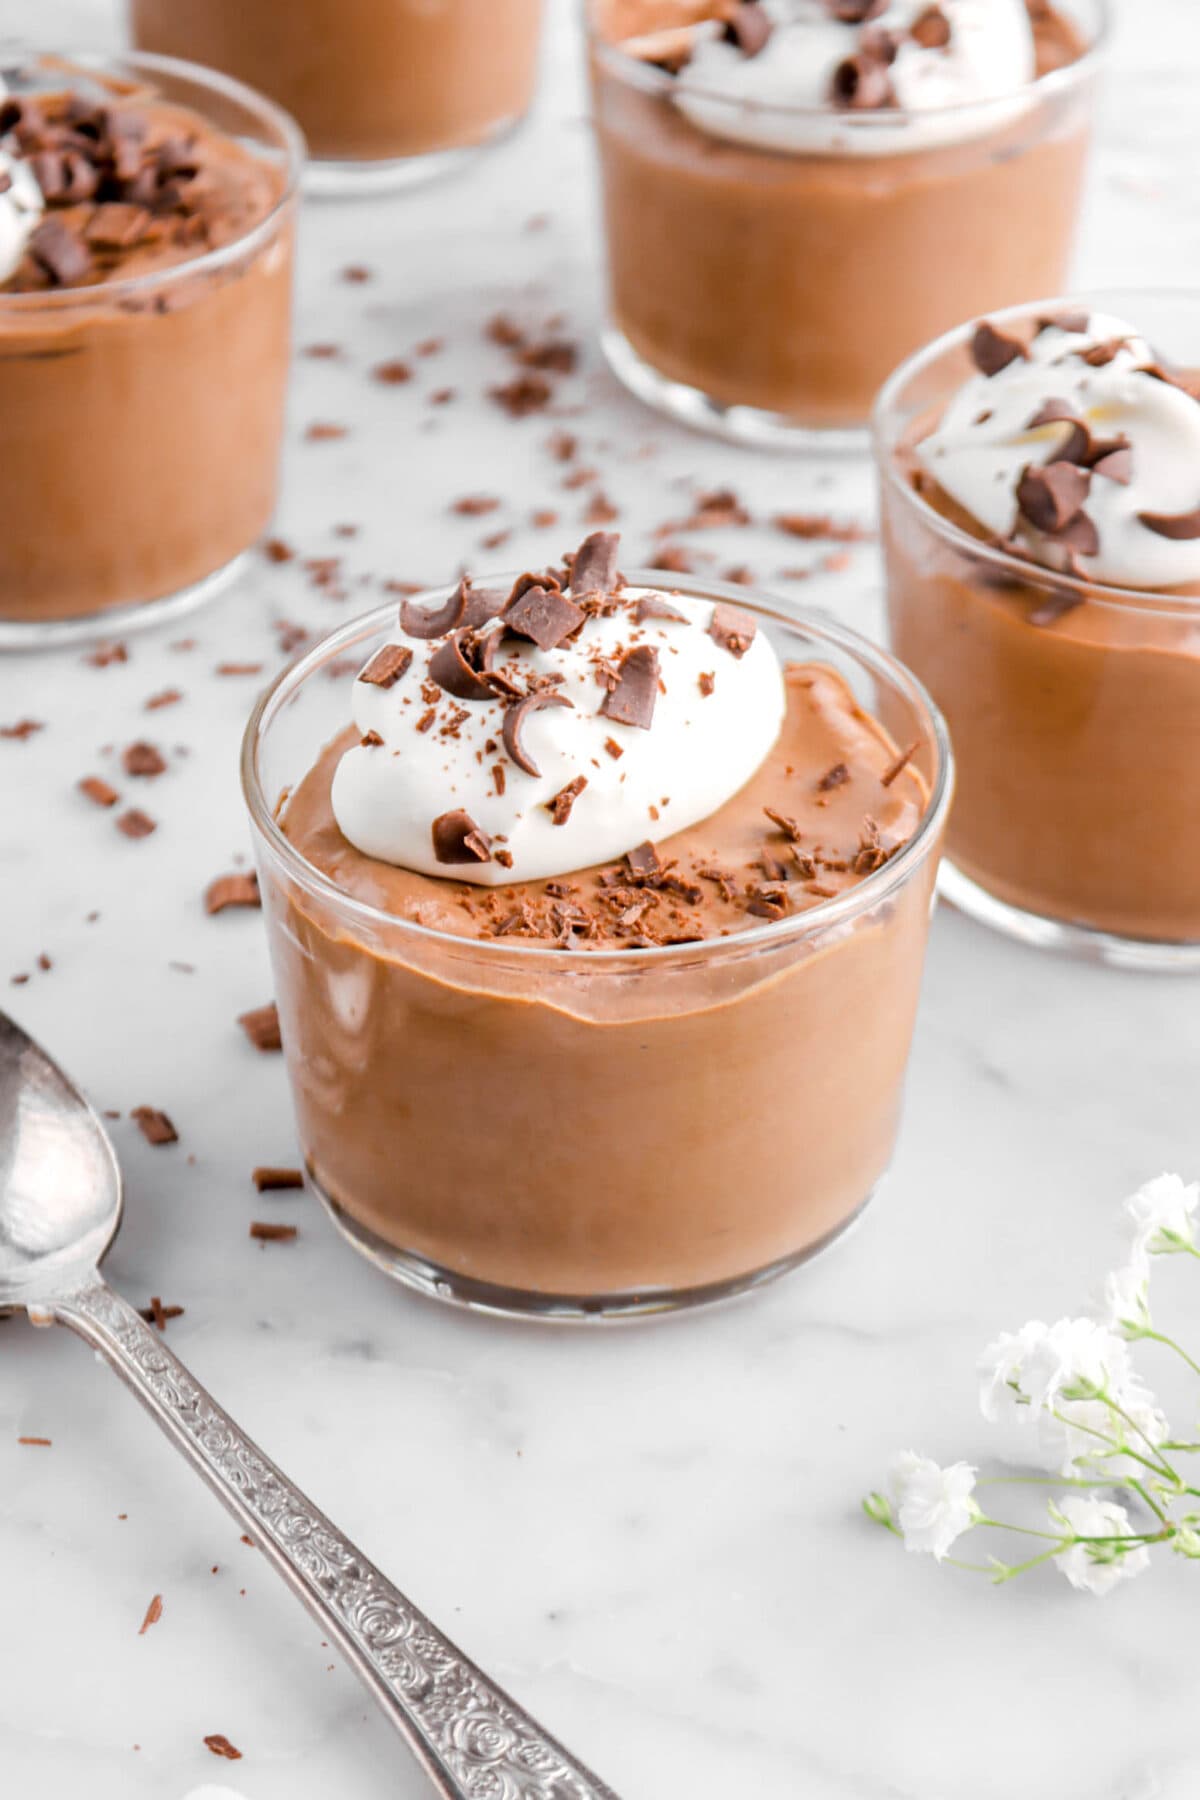 front shot of chocolate mousse in small glass with whipped cream and chocolate curls on top